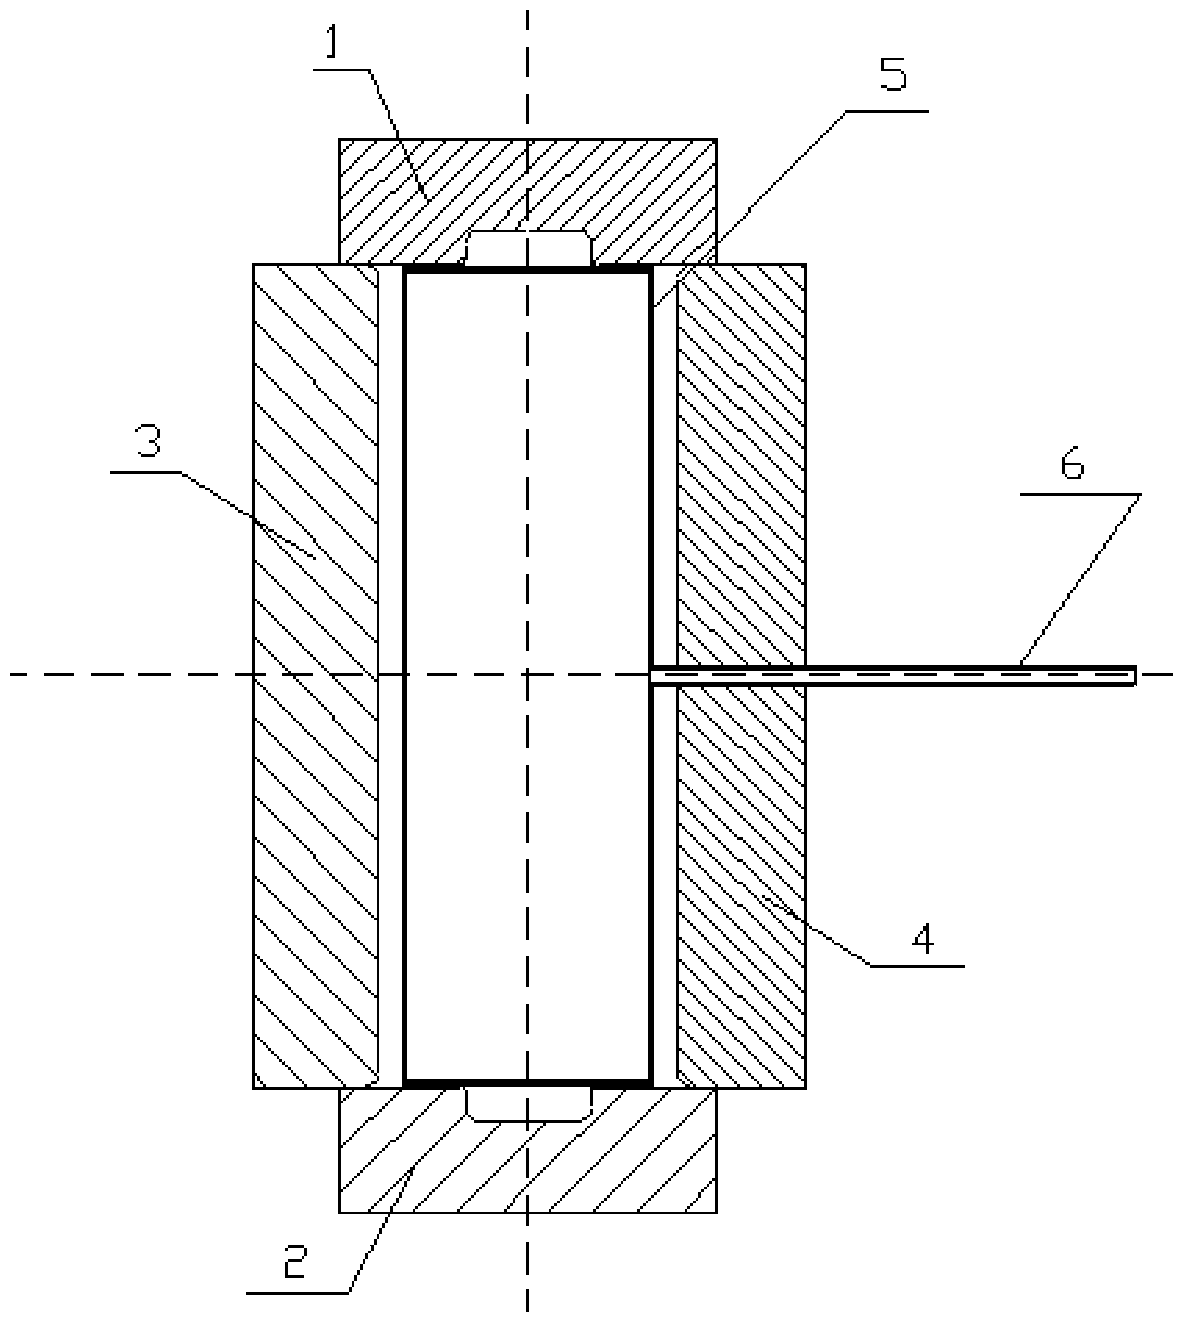 A method for manufacturing titanium alloy tubular parts with inward flanging at both ends with forced feeding